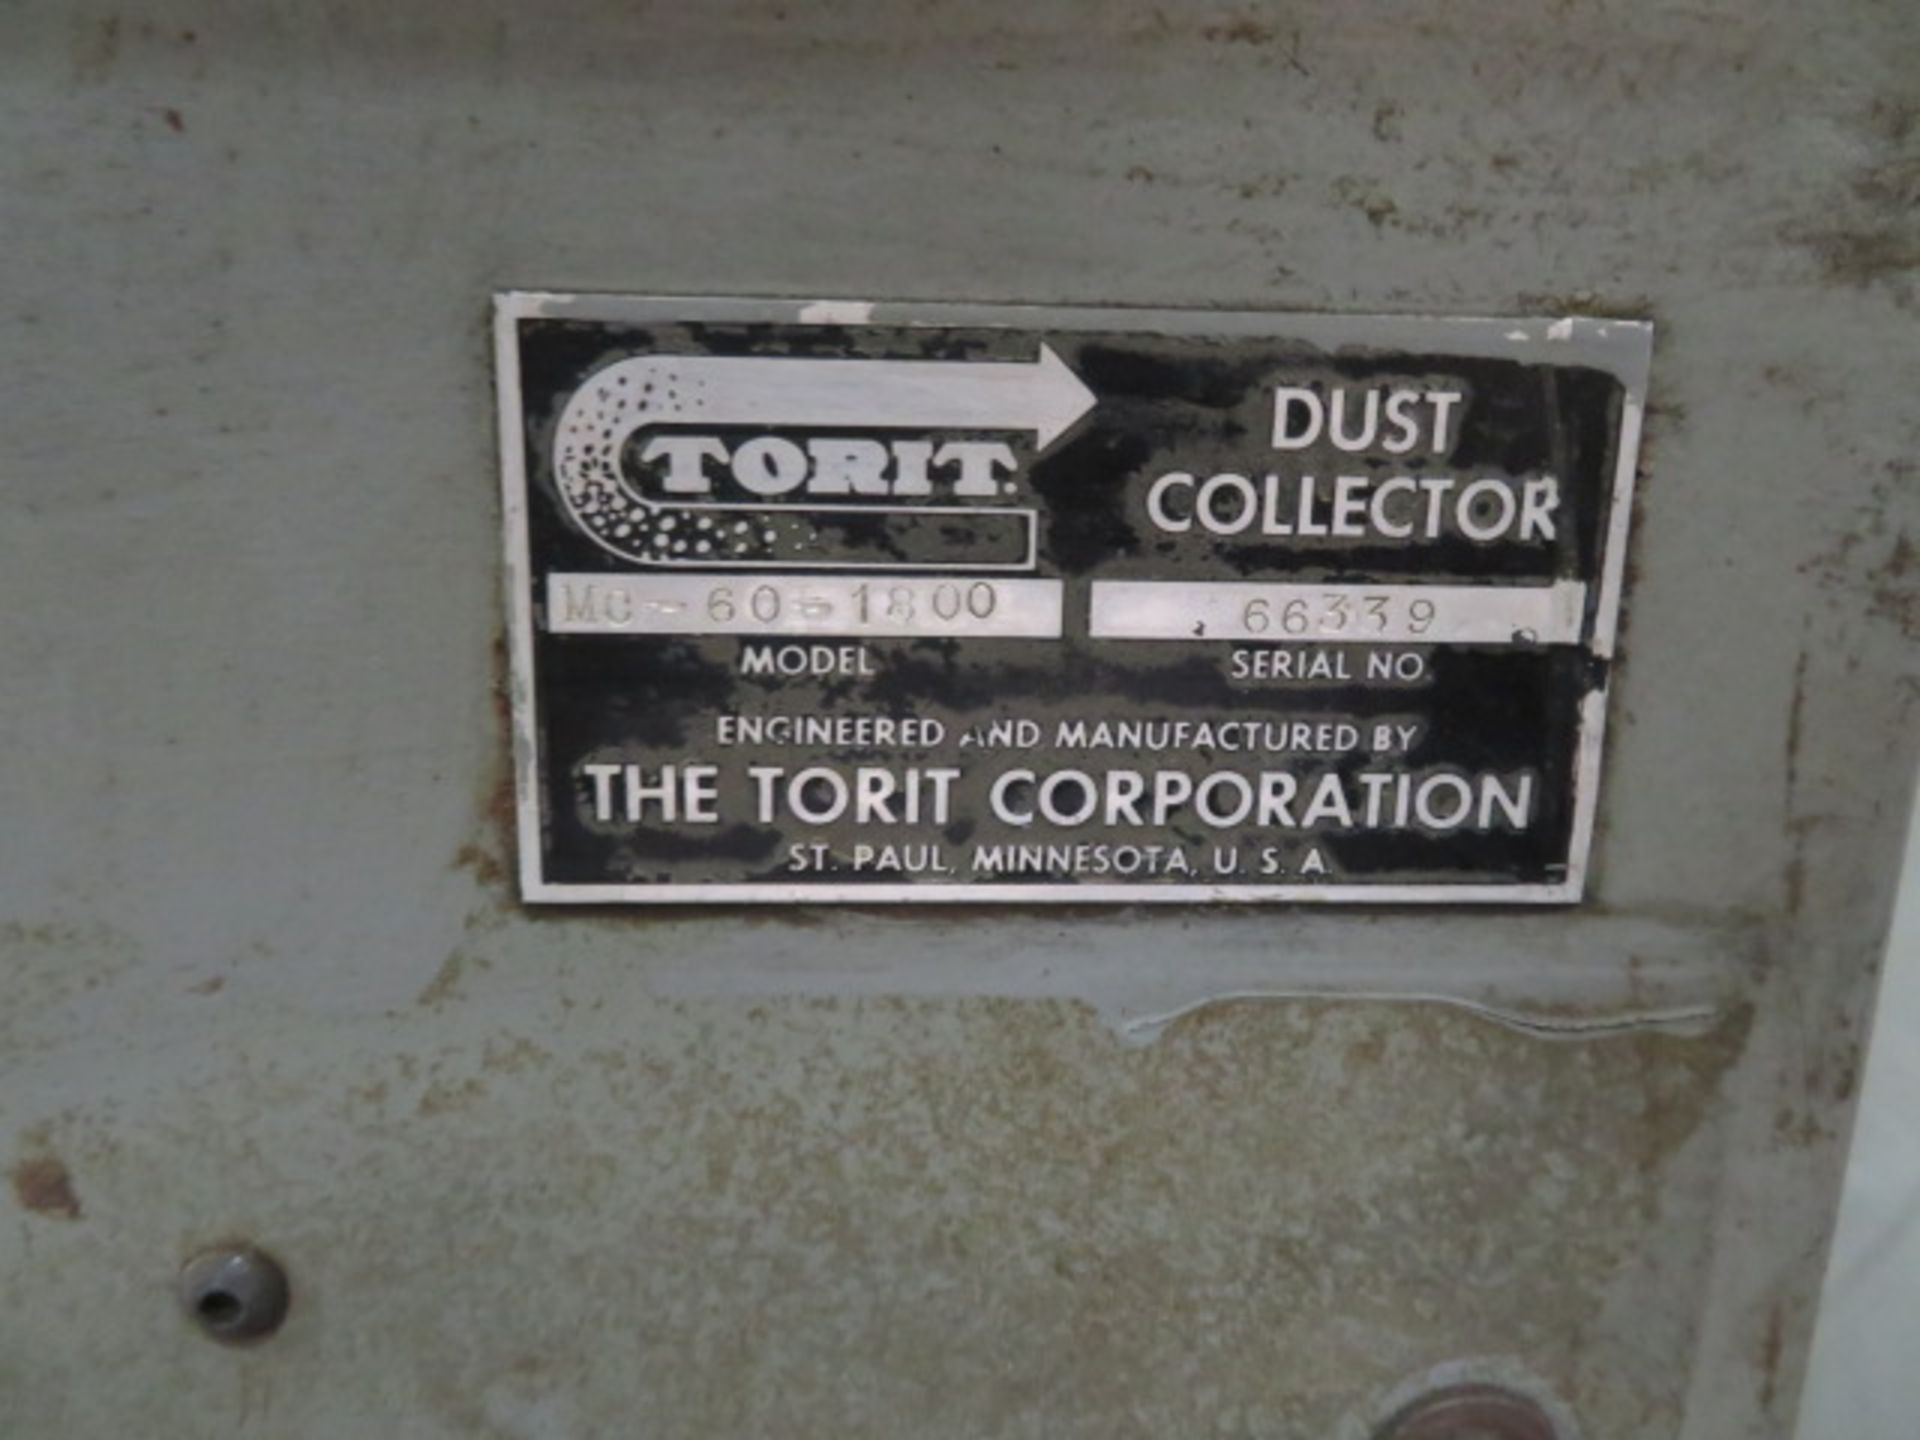 CABINET STYLE DUST COLLECTOR, TORIT MDL. MC-60-1800, S/N 66339 - Image 3 of 3